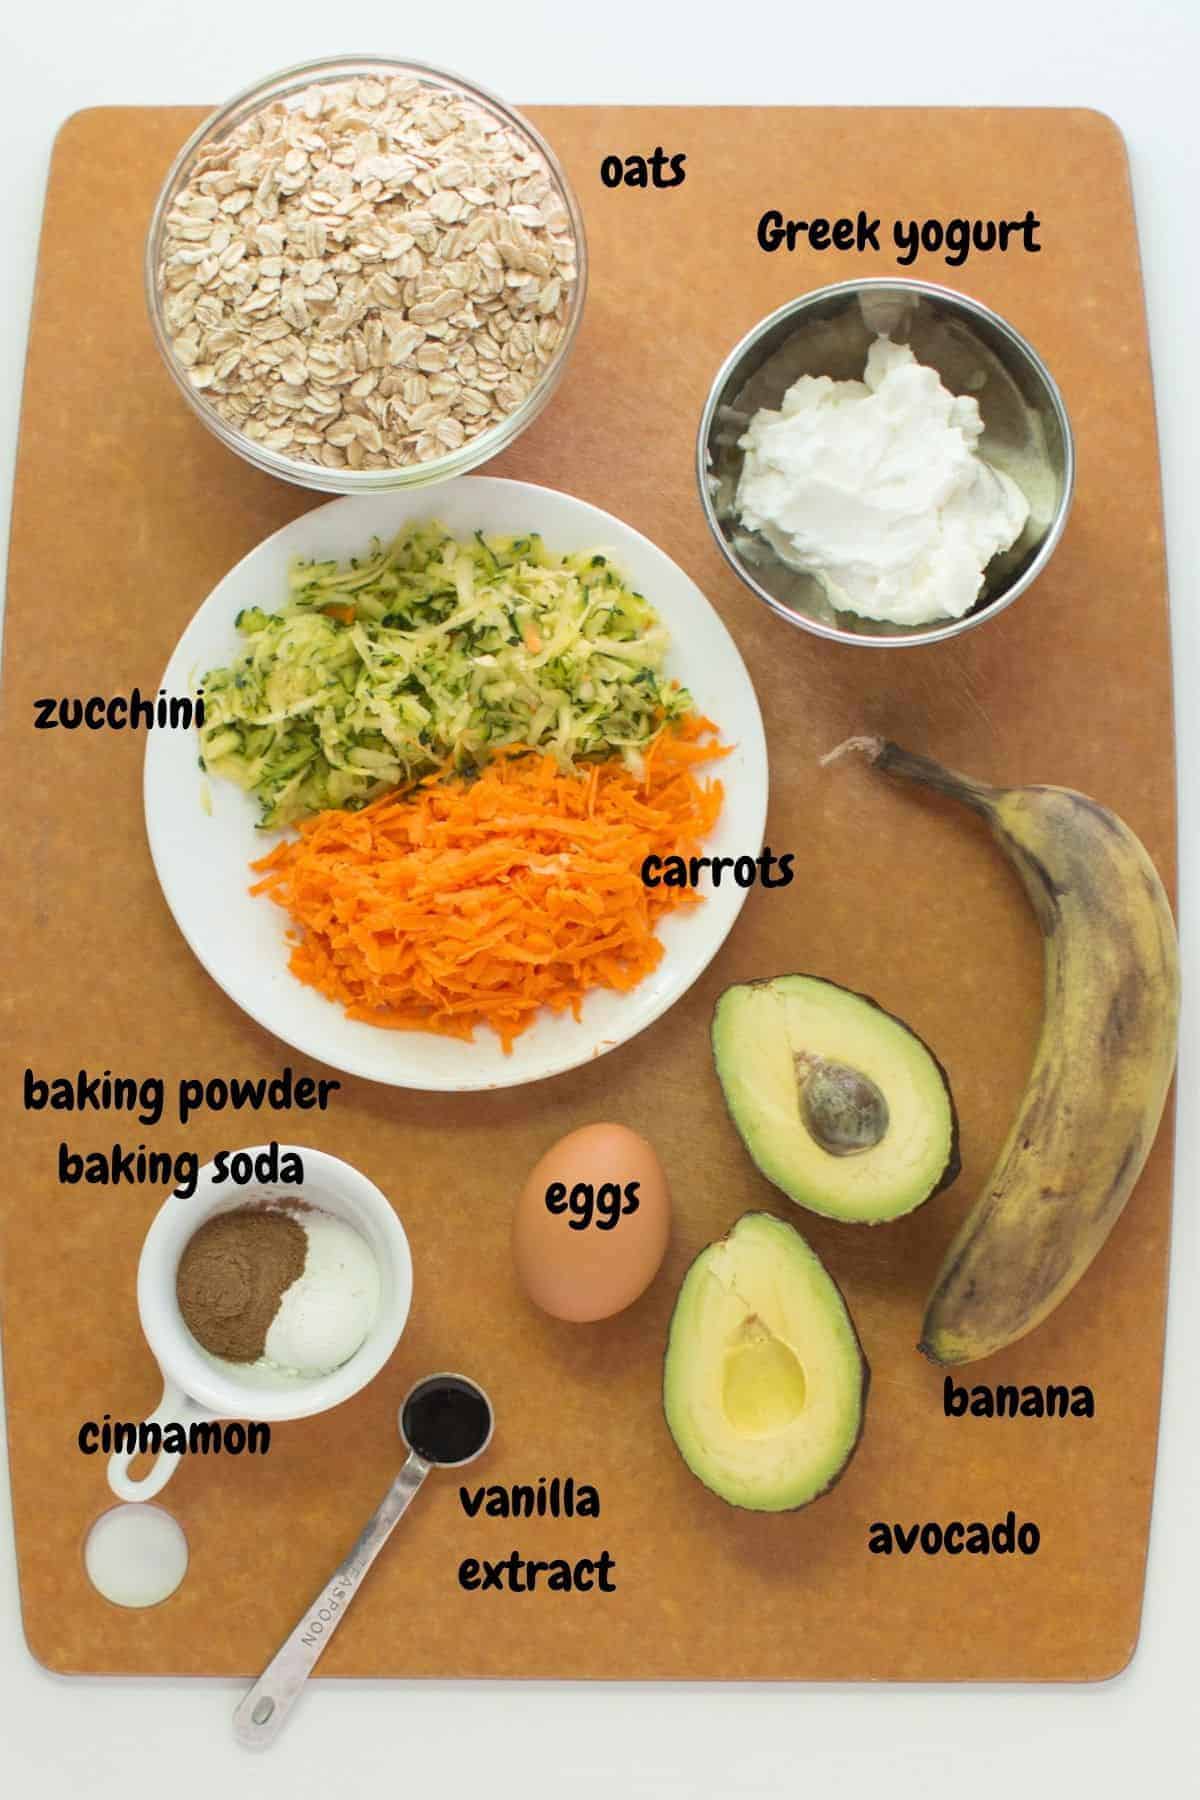 all the ingredients laid out on a wooden board